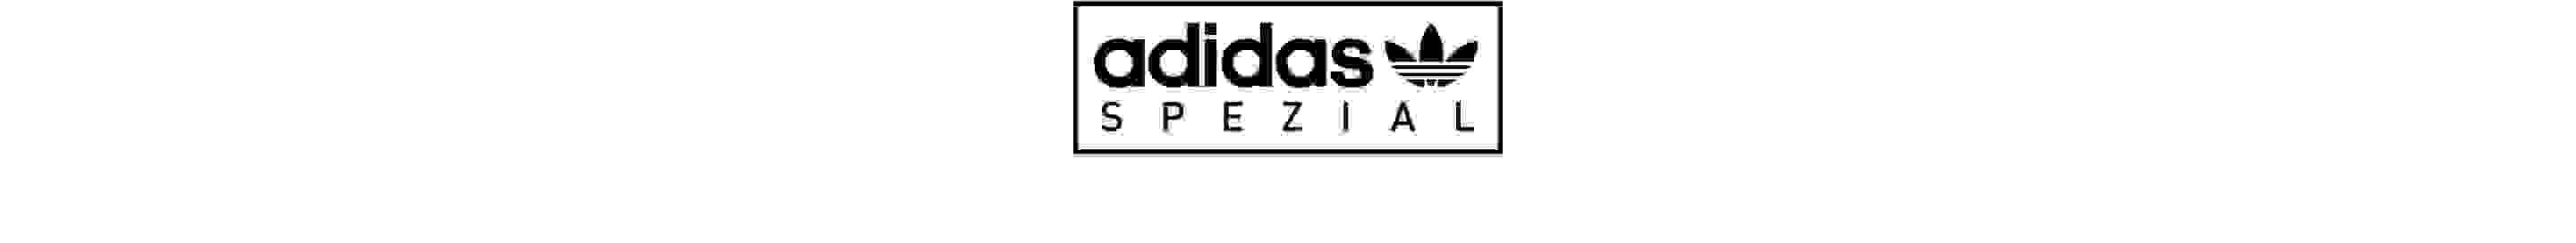 The adidas Spezial logo in black and white.